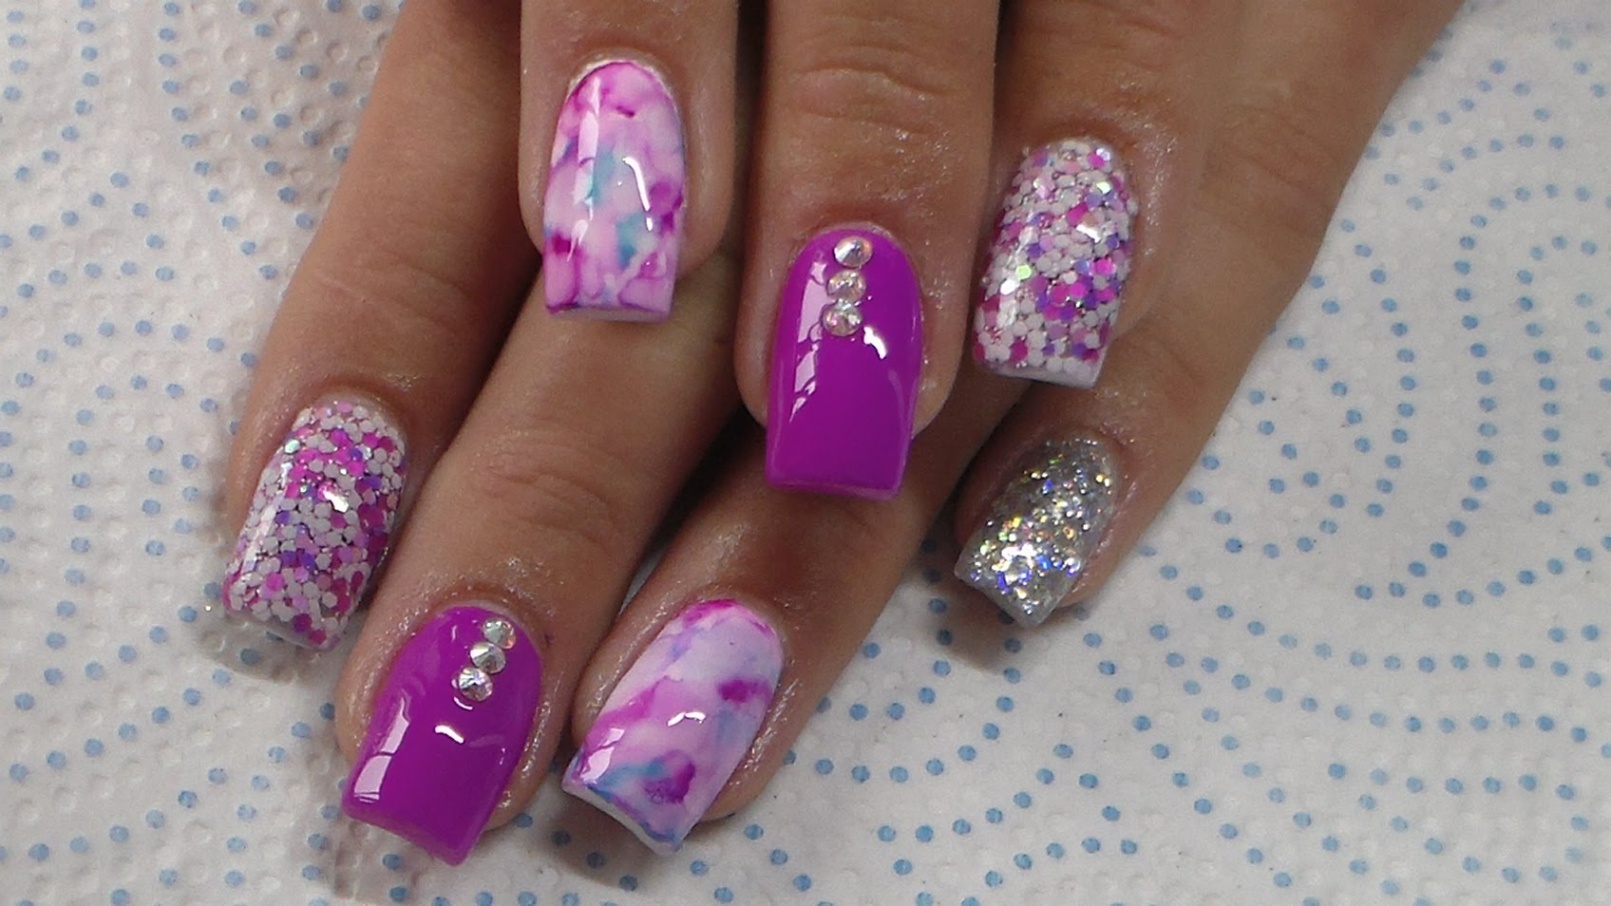 10 Stunning Pink And Purple Nail Designs To Make Your Manicure Pop!